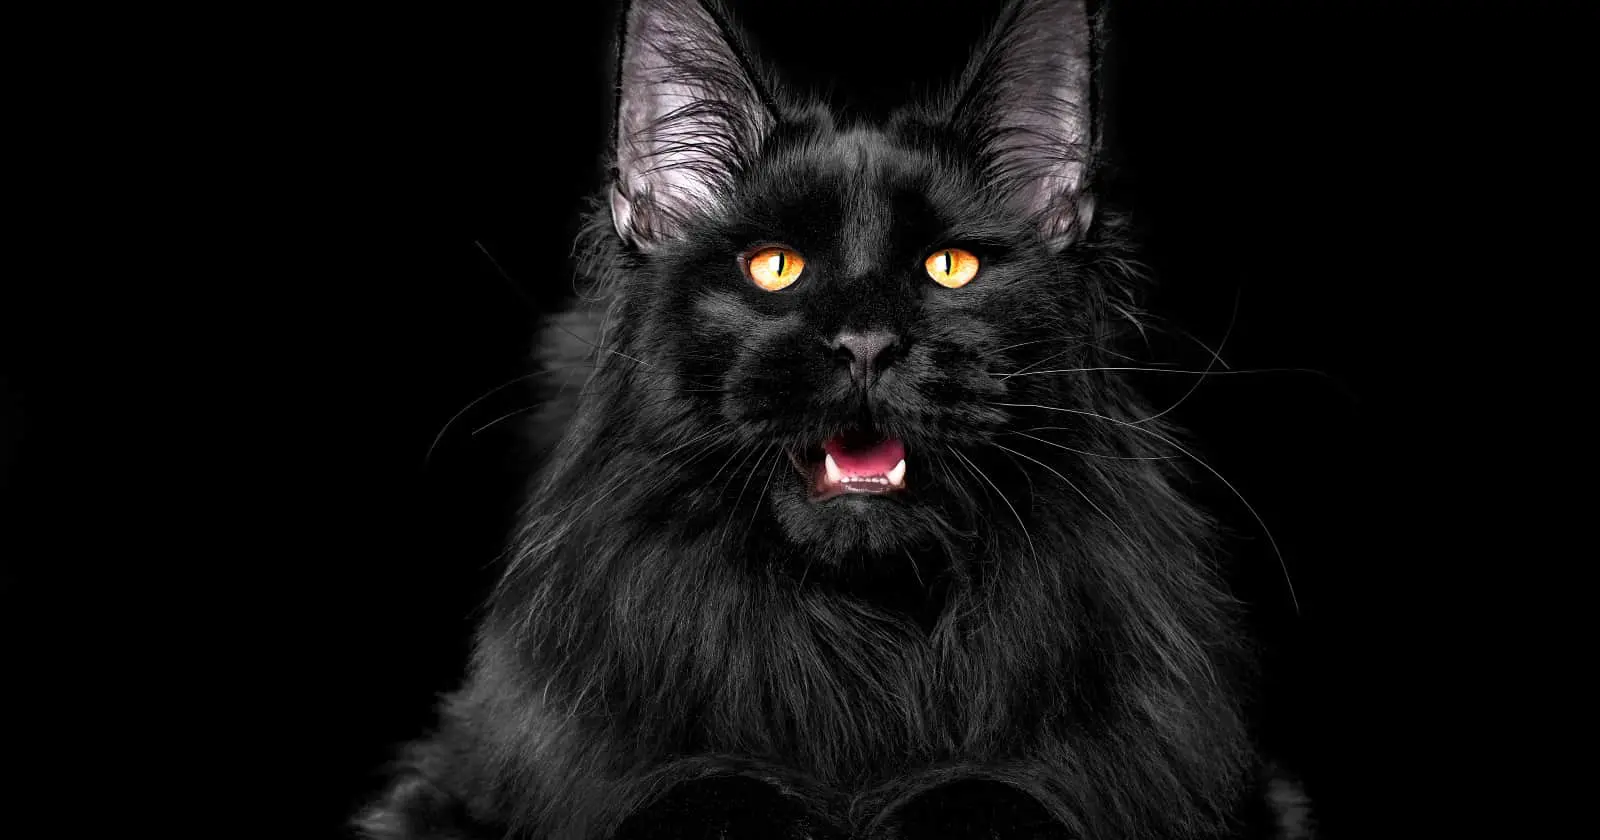 Are you in love with black cat breeds and can’t get enough of them? Then you’re going to love this list! We rounded up the most stunning ebony kitties!